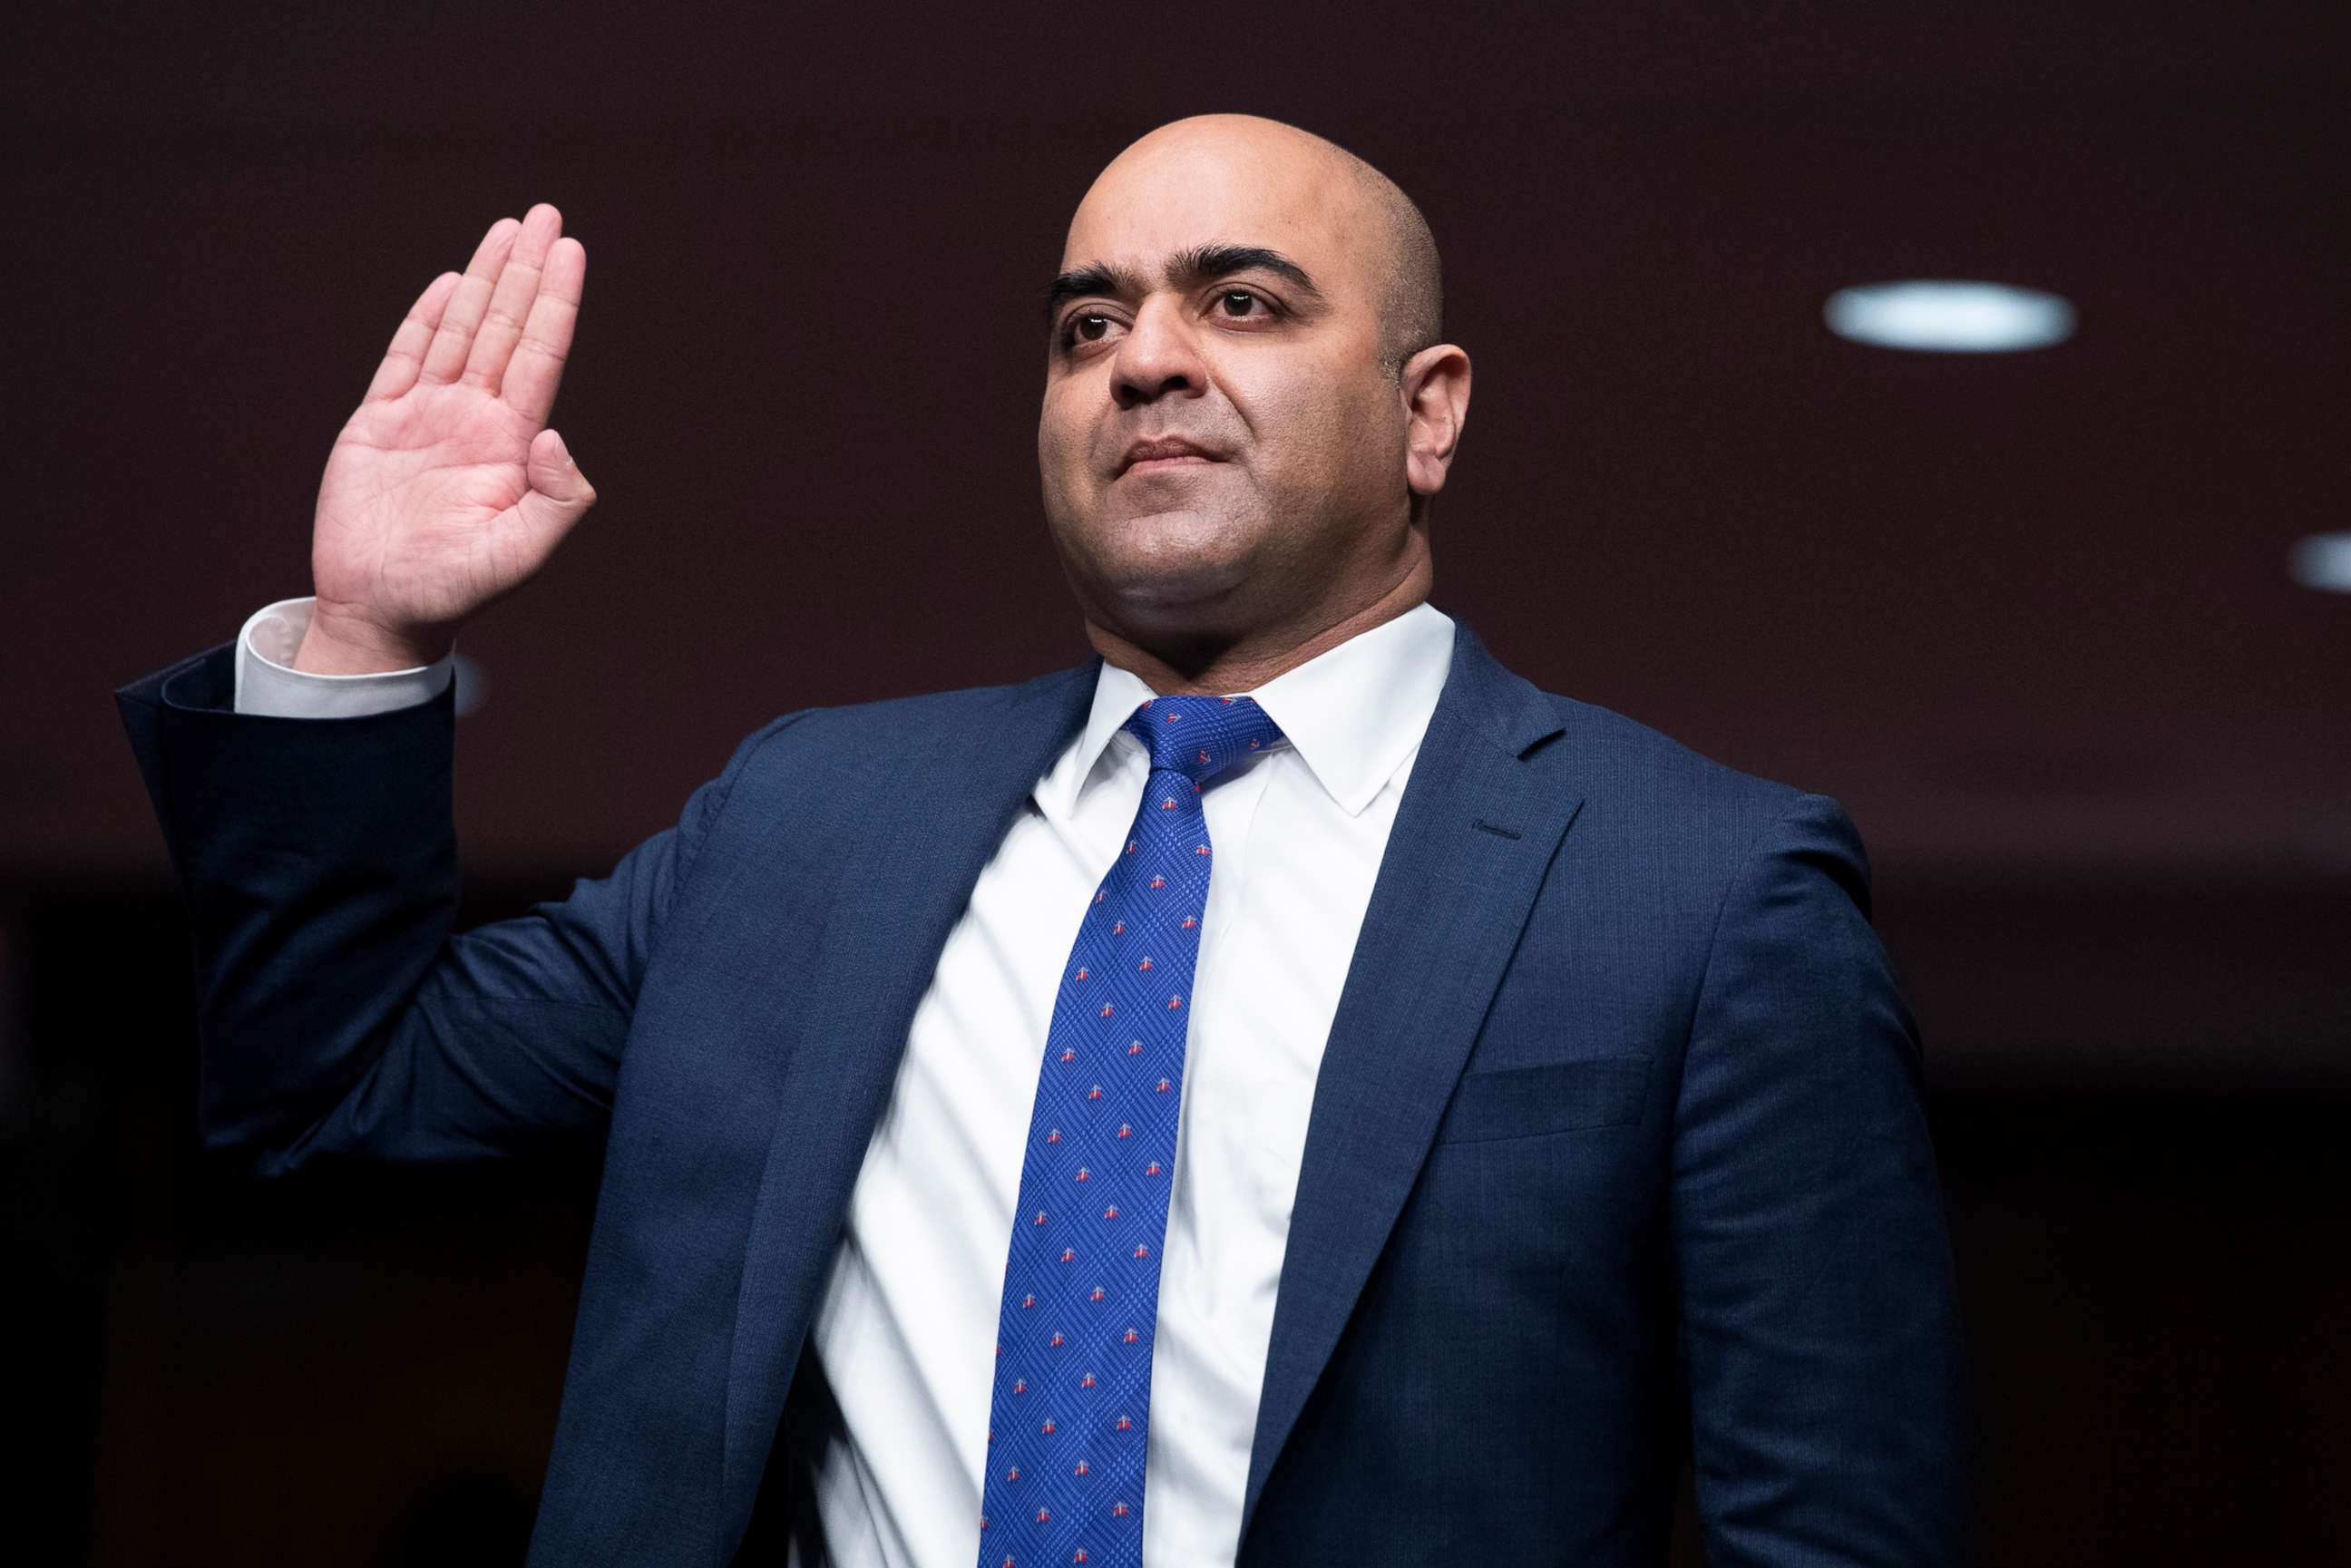 PHOTO: In this April 28, 2021, file photo, Zahid N. Quraishi, nominee to be U.S. District Judge for the District of New Jersey, is sworn into the Senate Judiciary Committee confirmation hearing in Washington, D.C.